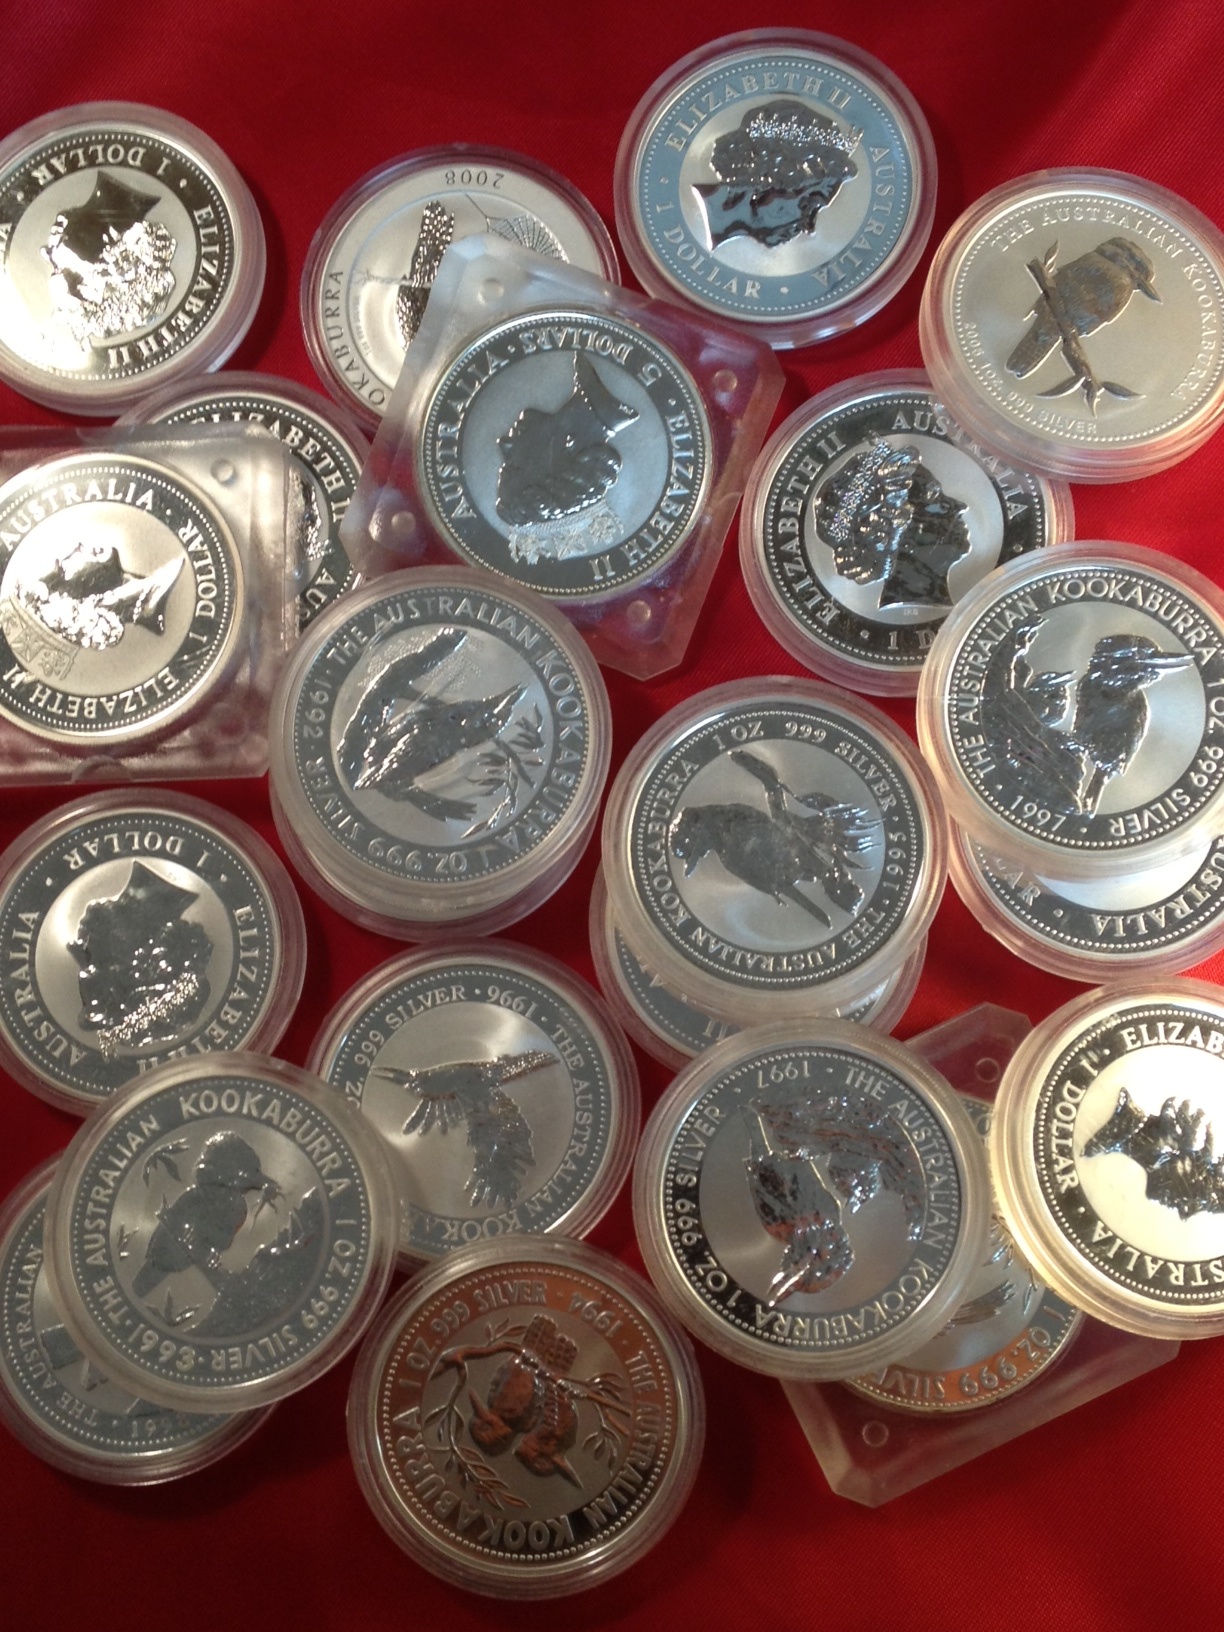 Kookaburra silver coins for sale from Australia